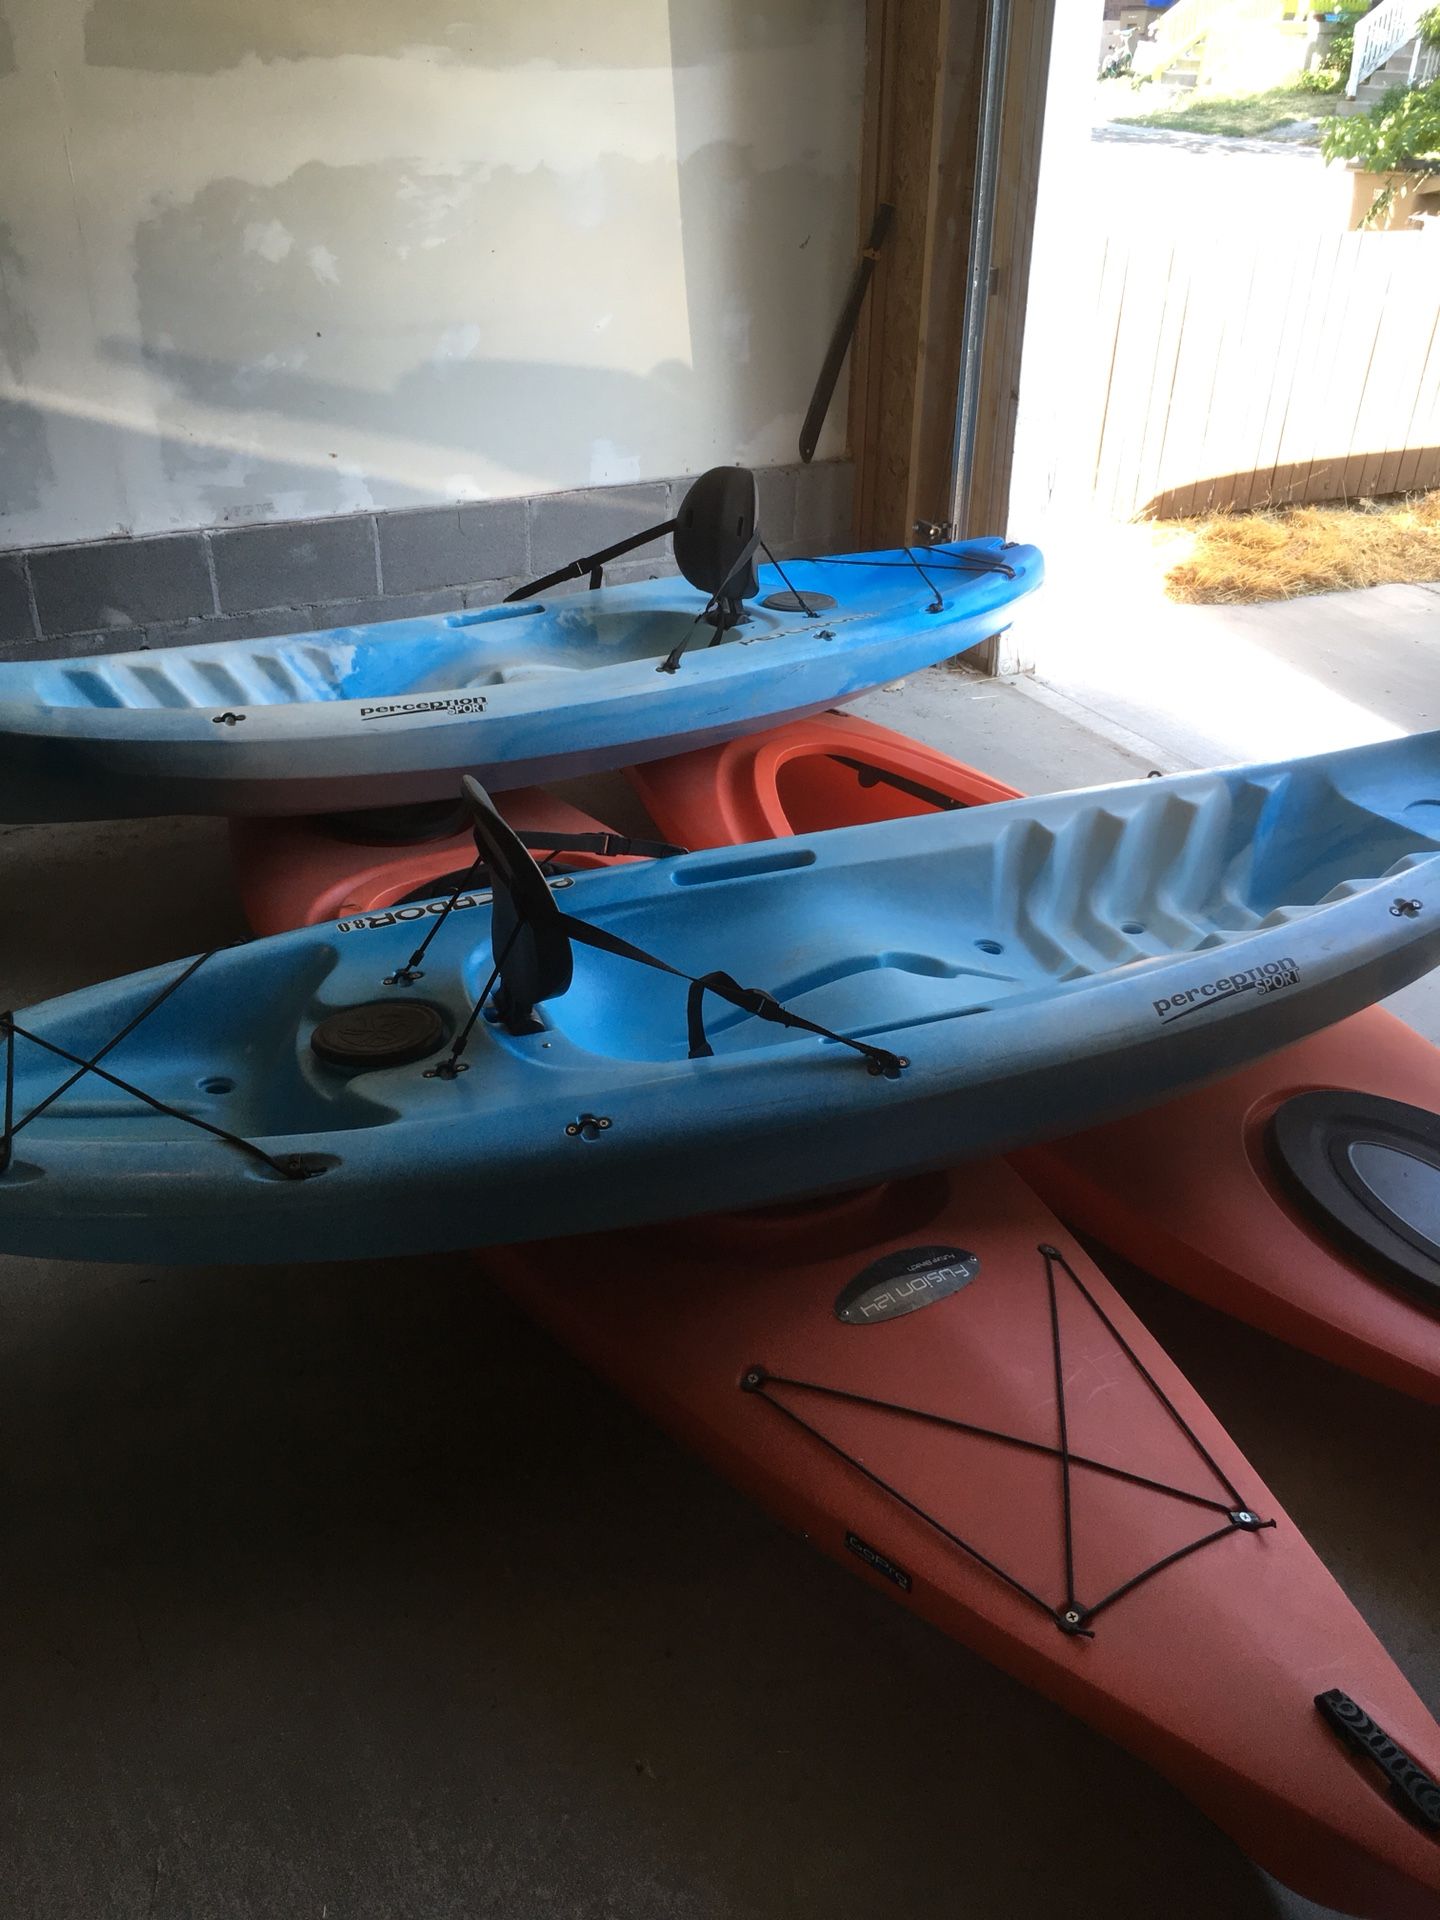 4 kayaks (two ocean & 2 traditional) and two paddles